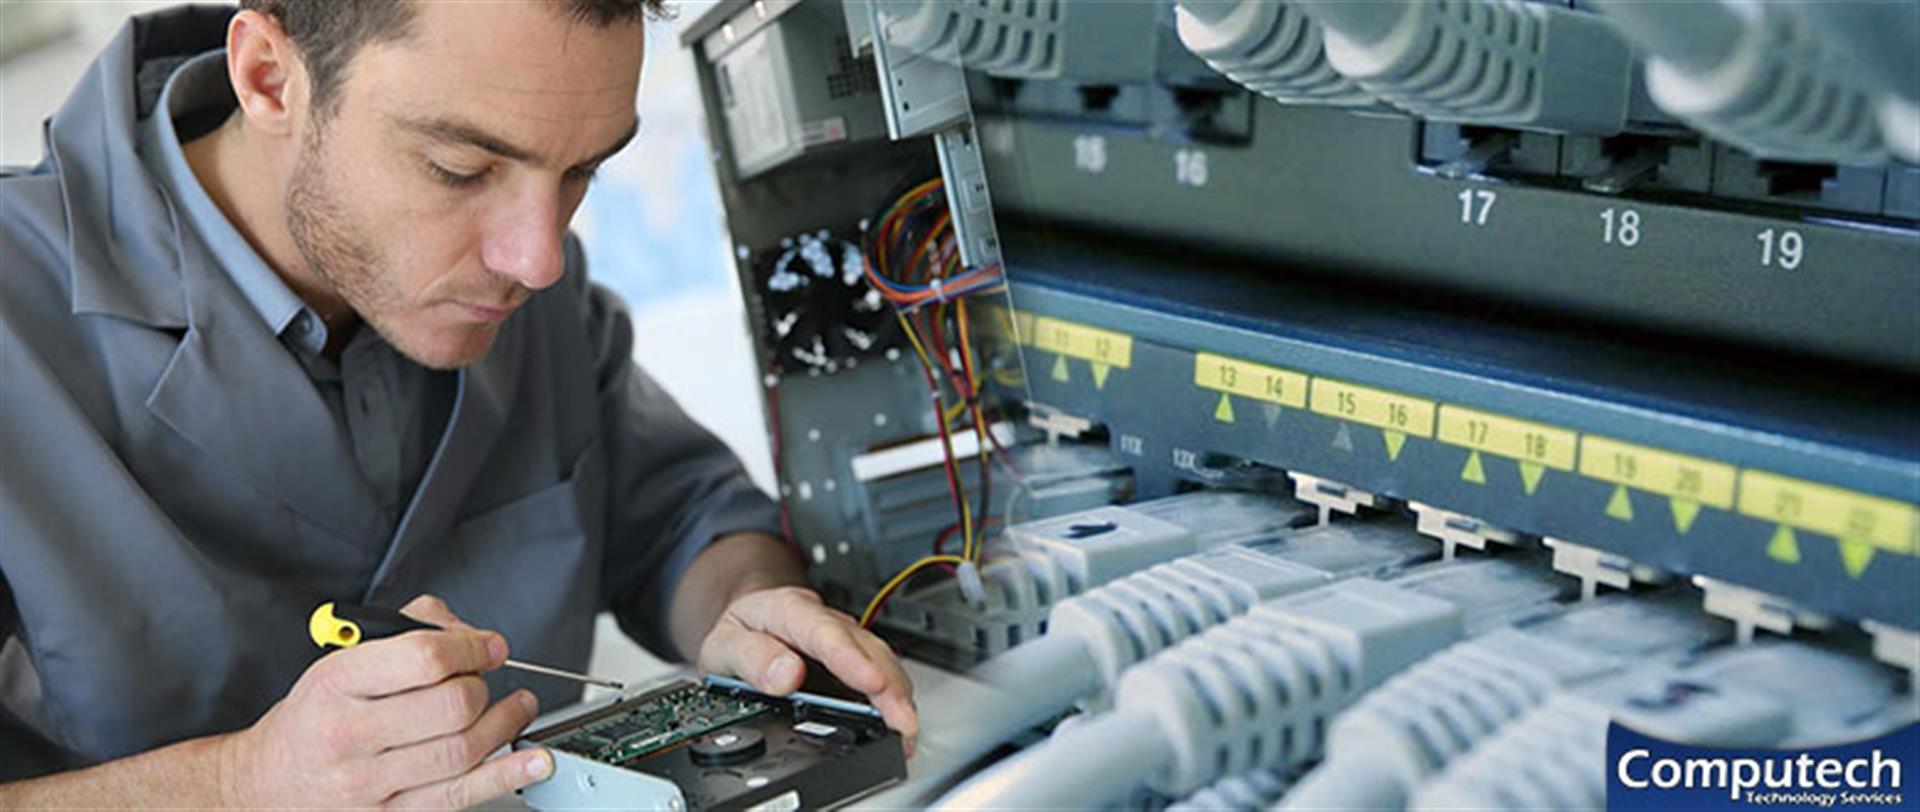 Braselton Georgia On-Site Computer & Printer Repair, Networking, Voice & Data Cabling Solutions